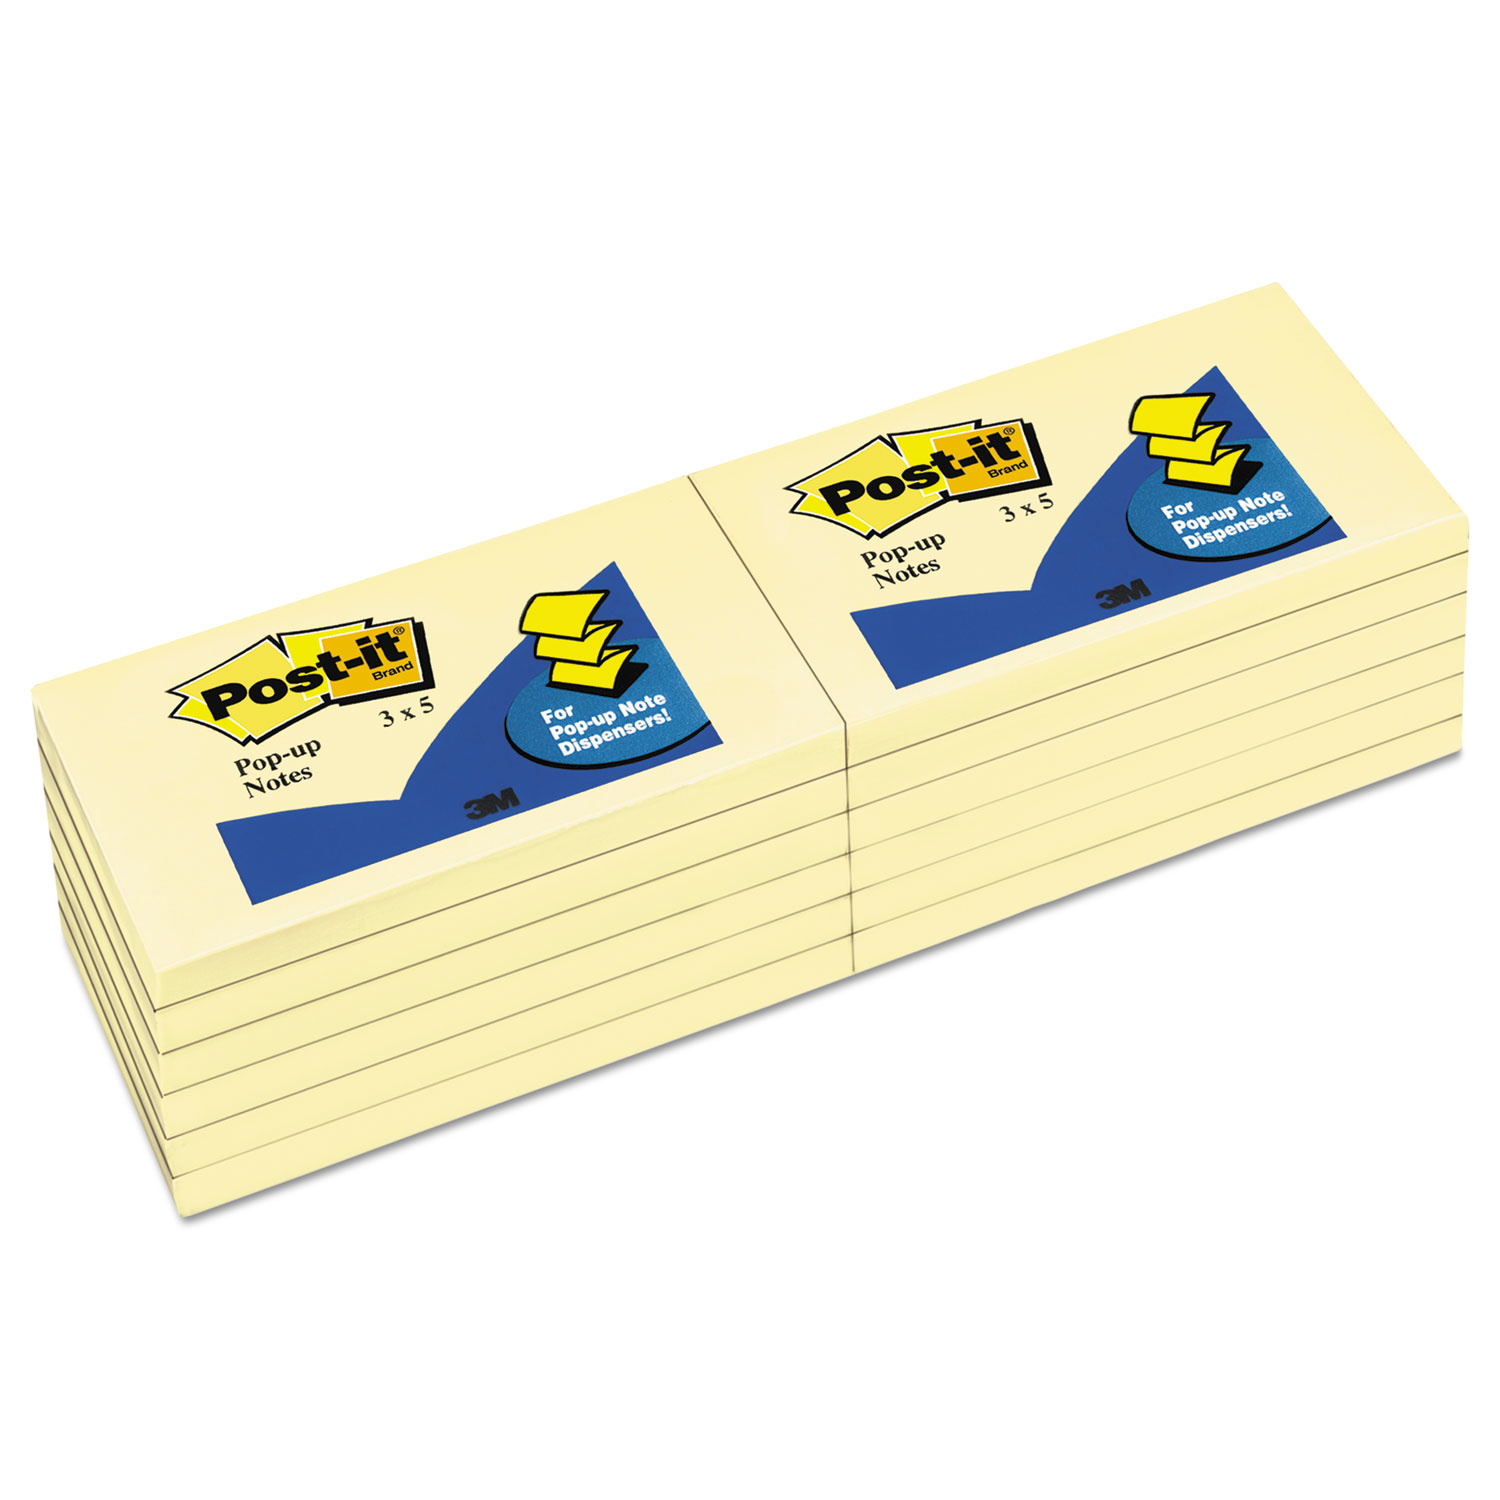  Post-it Pop-up Notes R350-YW Original Canary Yellow Pop-Up Refill, 3 x 5, 12/Pack (MMMR350YW) 